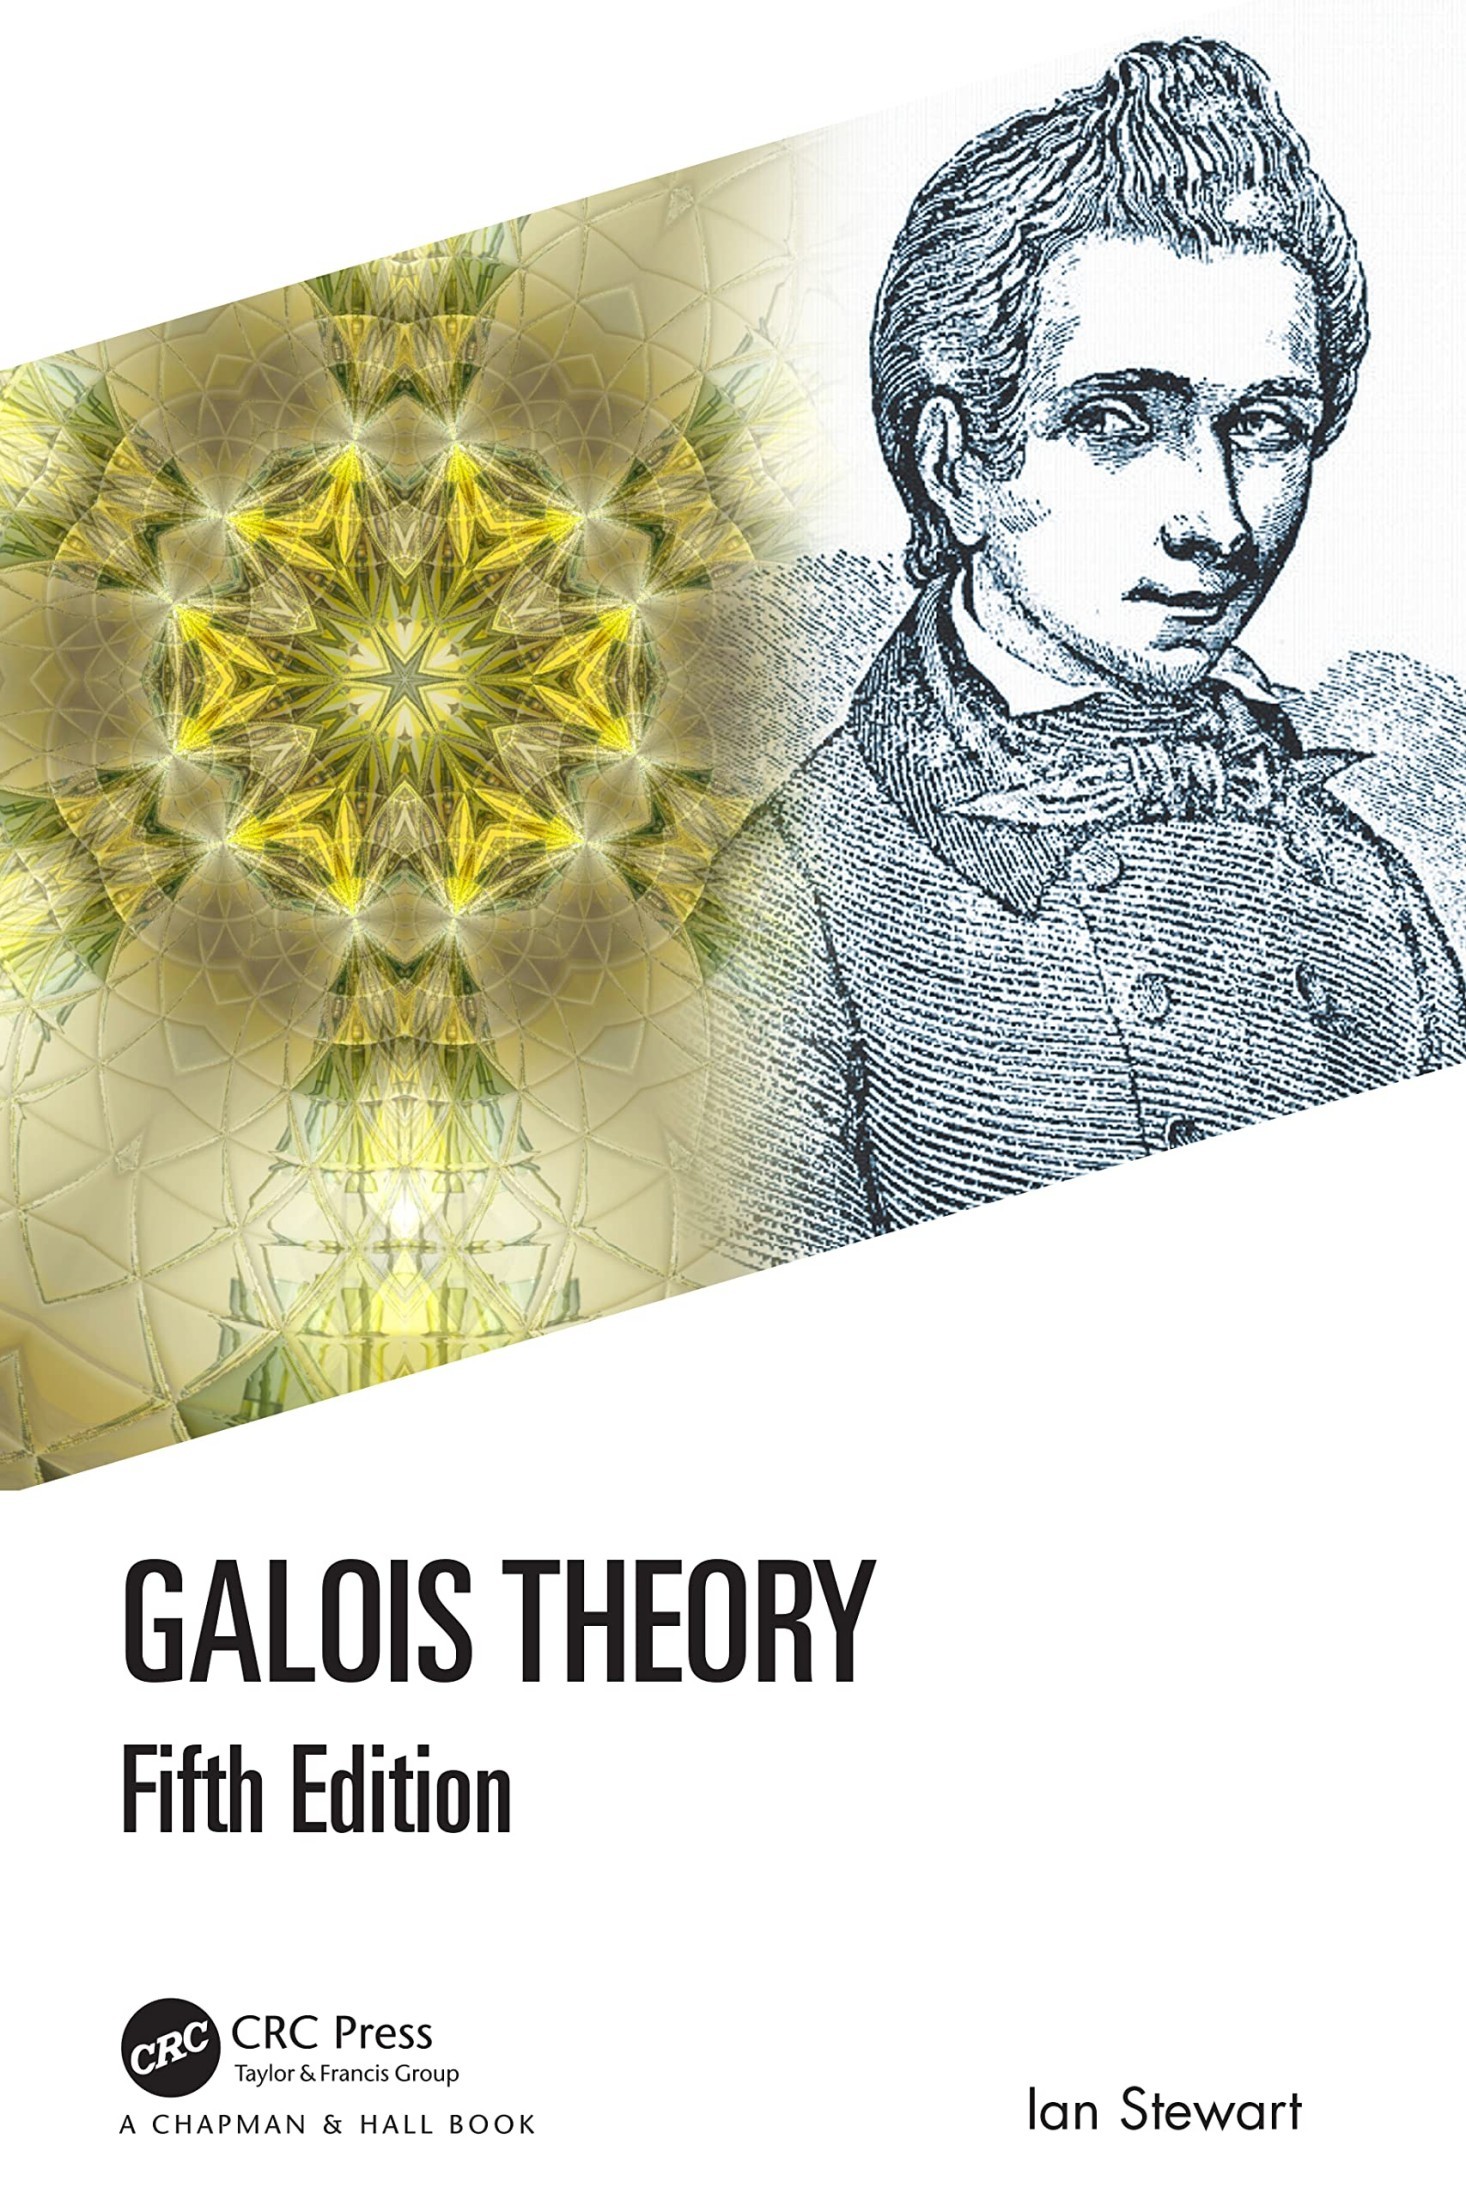 Galois Theory 5th Edition - Instructor's Manual and Solutions